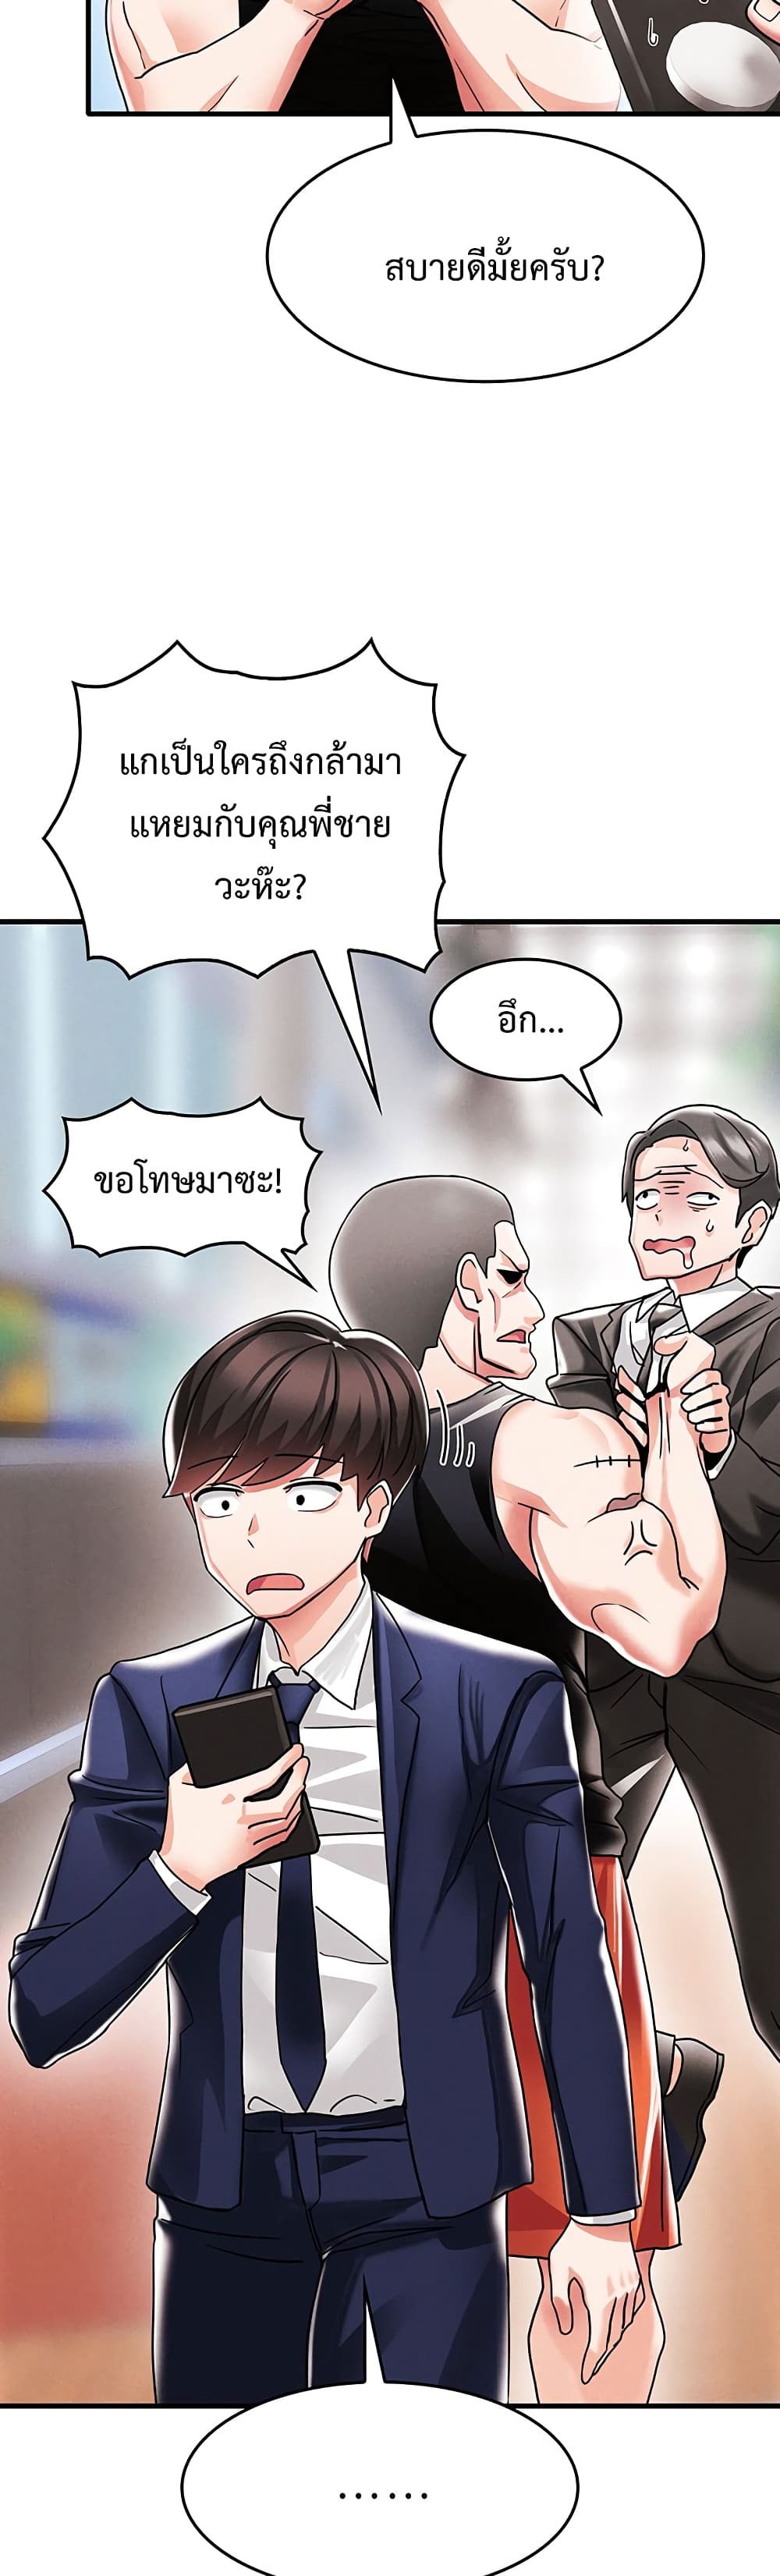 Relationship Reverse Button: Let’s Make Her Submissive 3 ภาพที่ 21